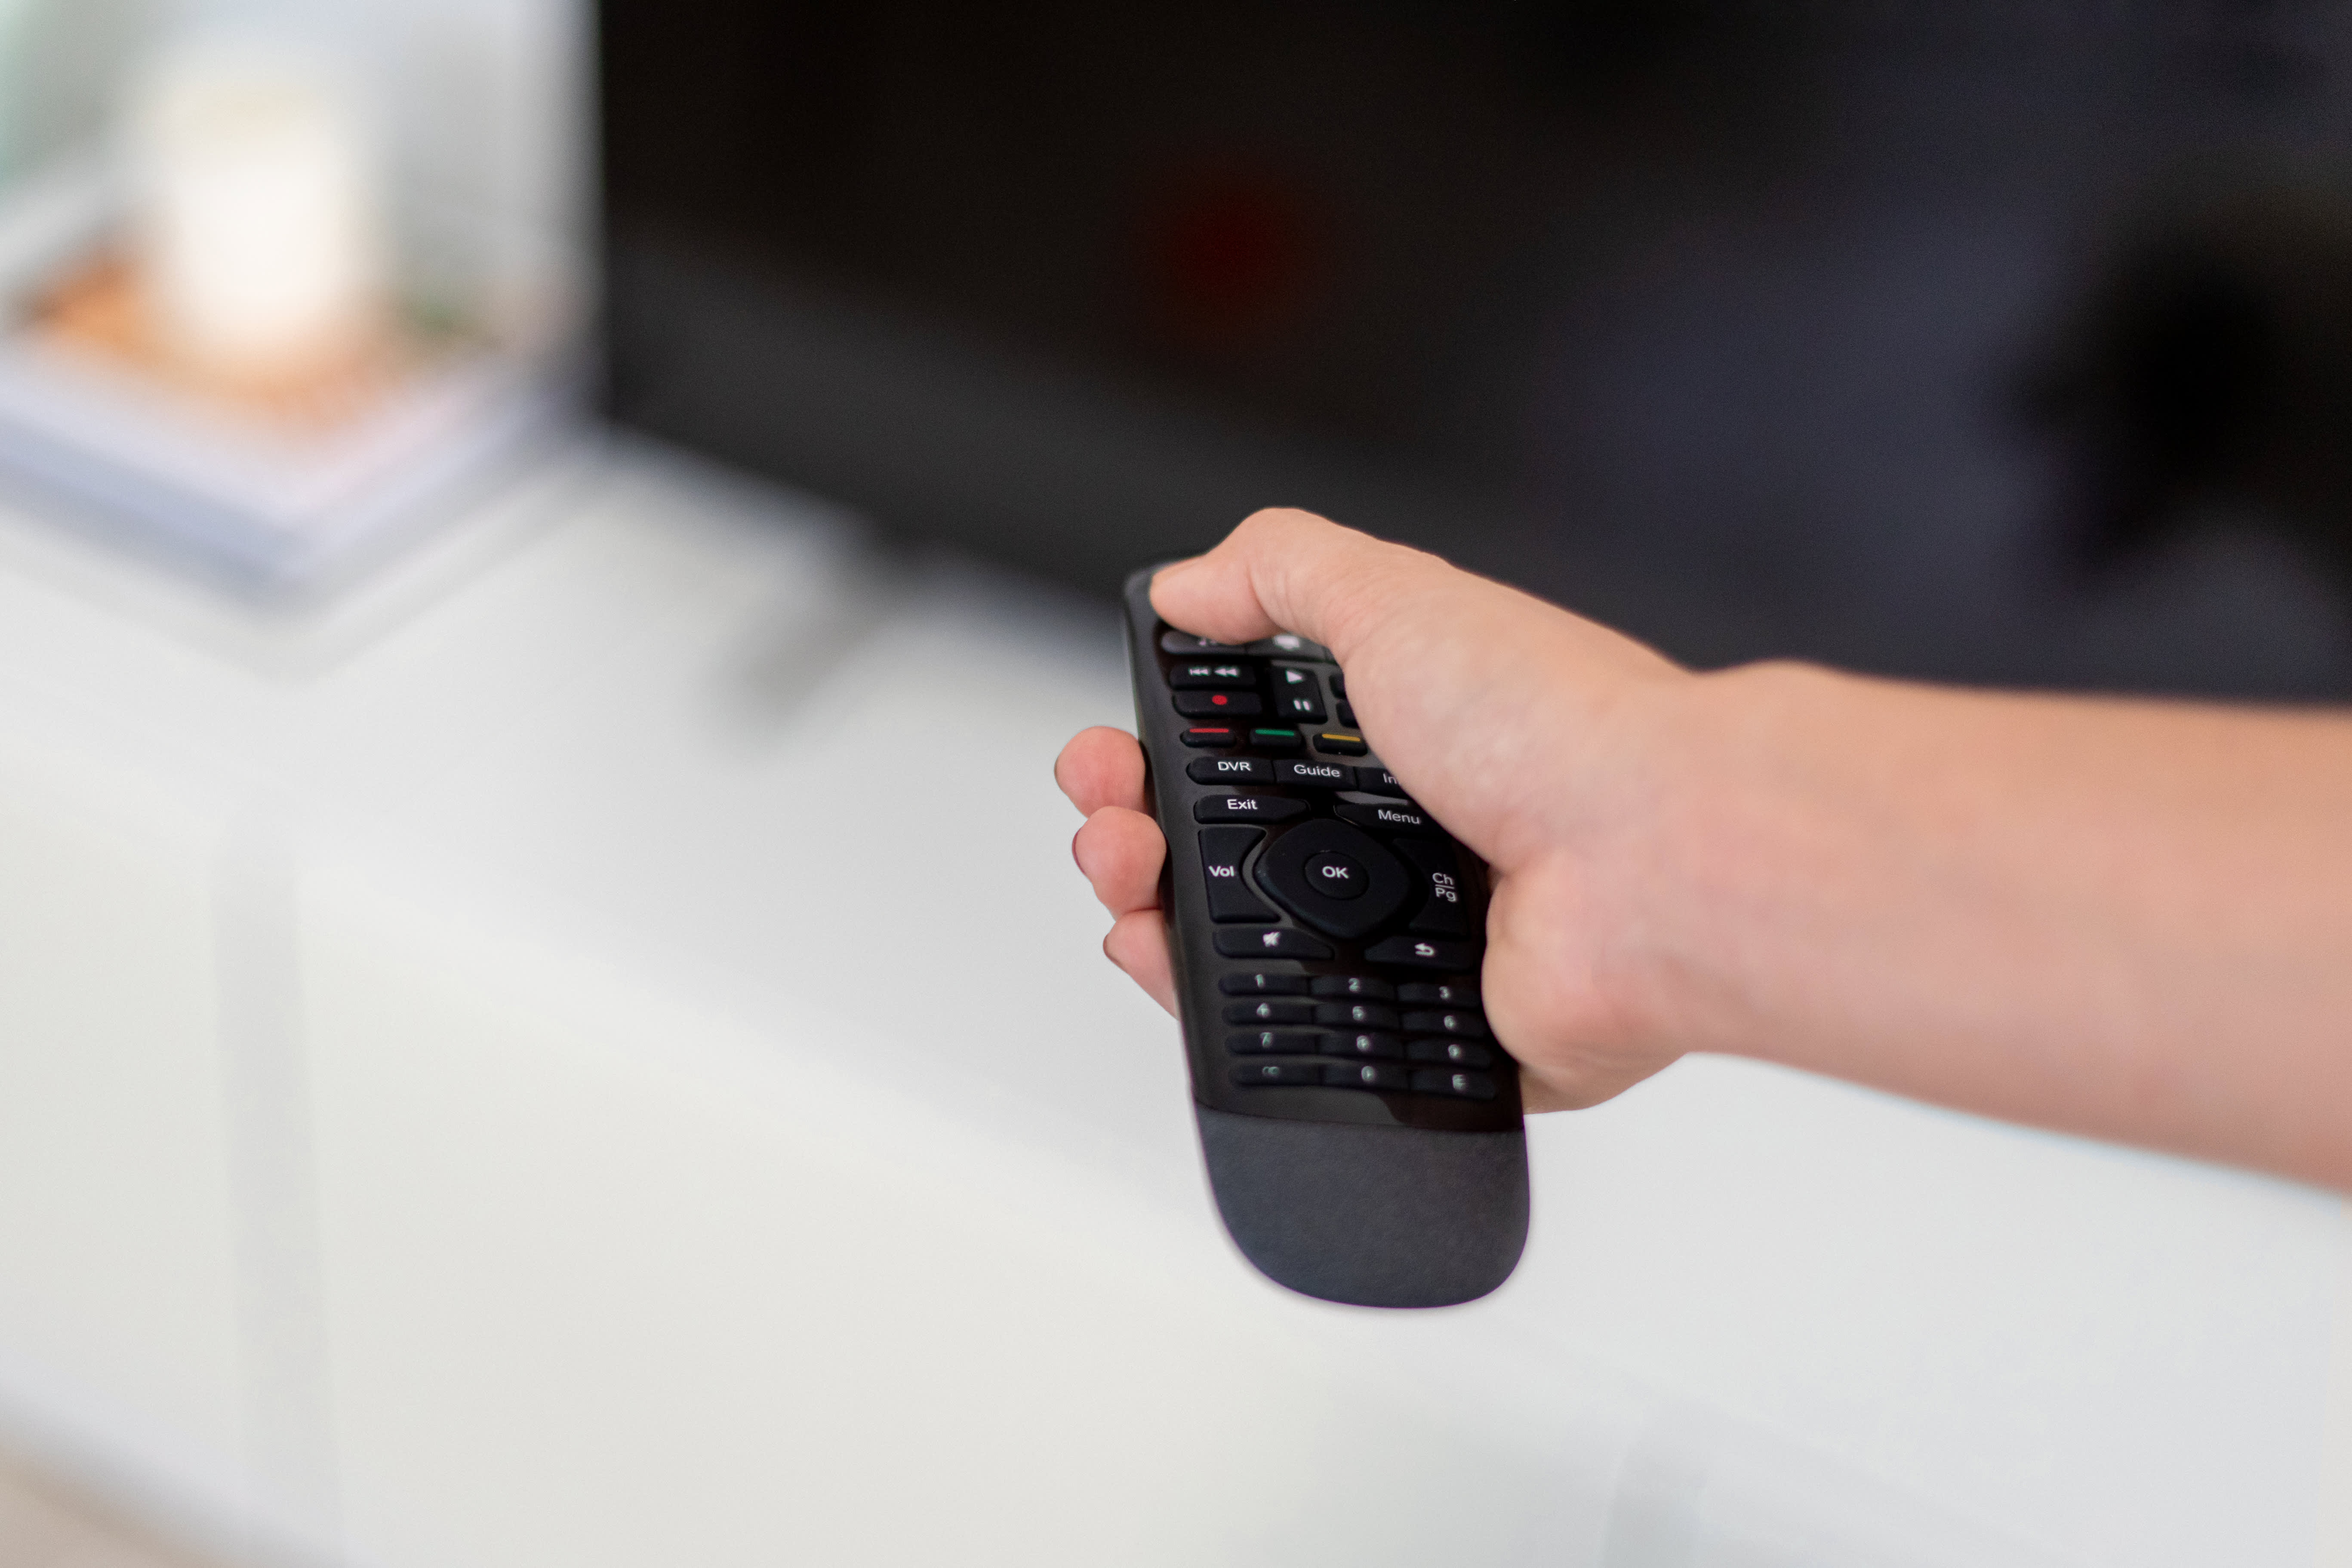 How to clean a TV remote control and how often to do it